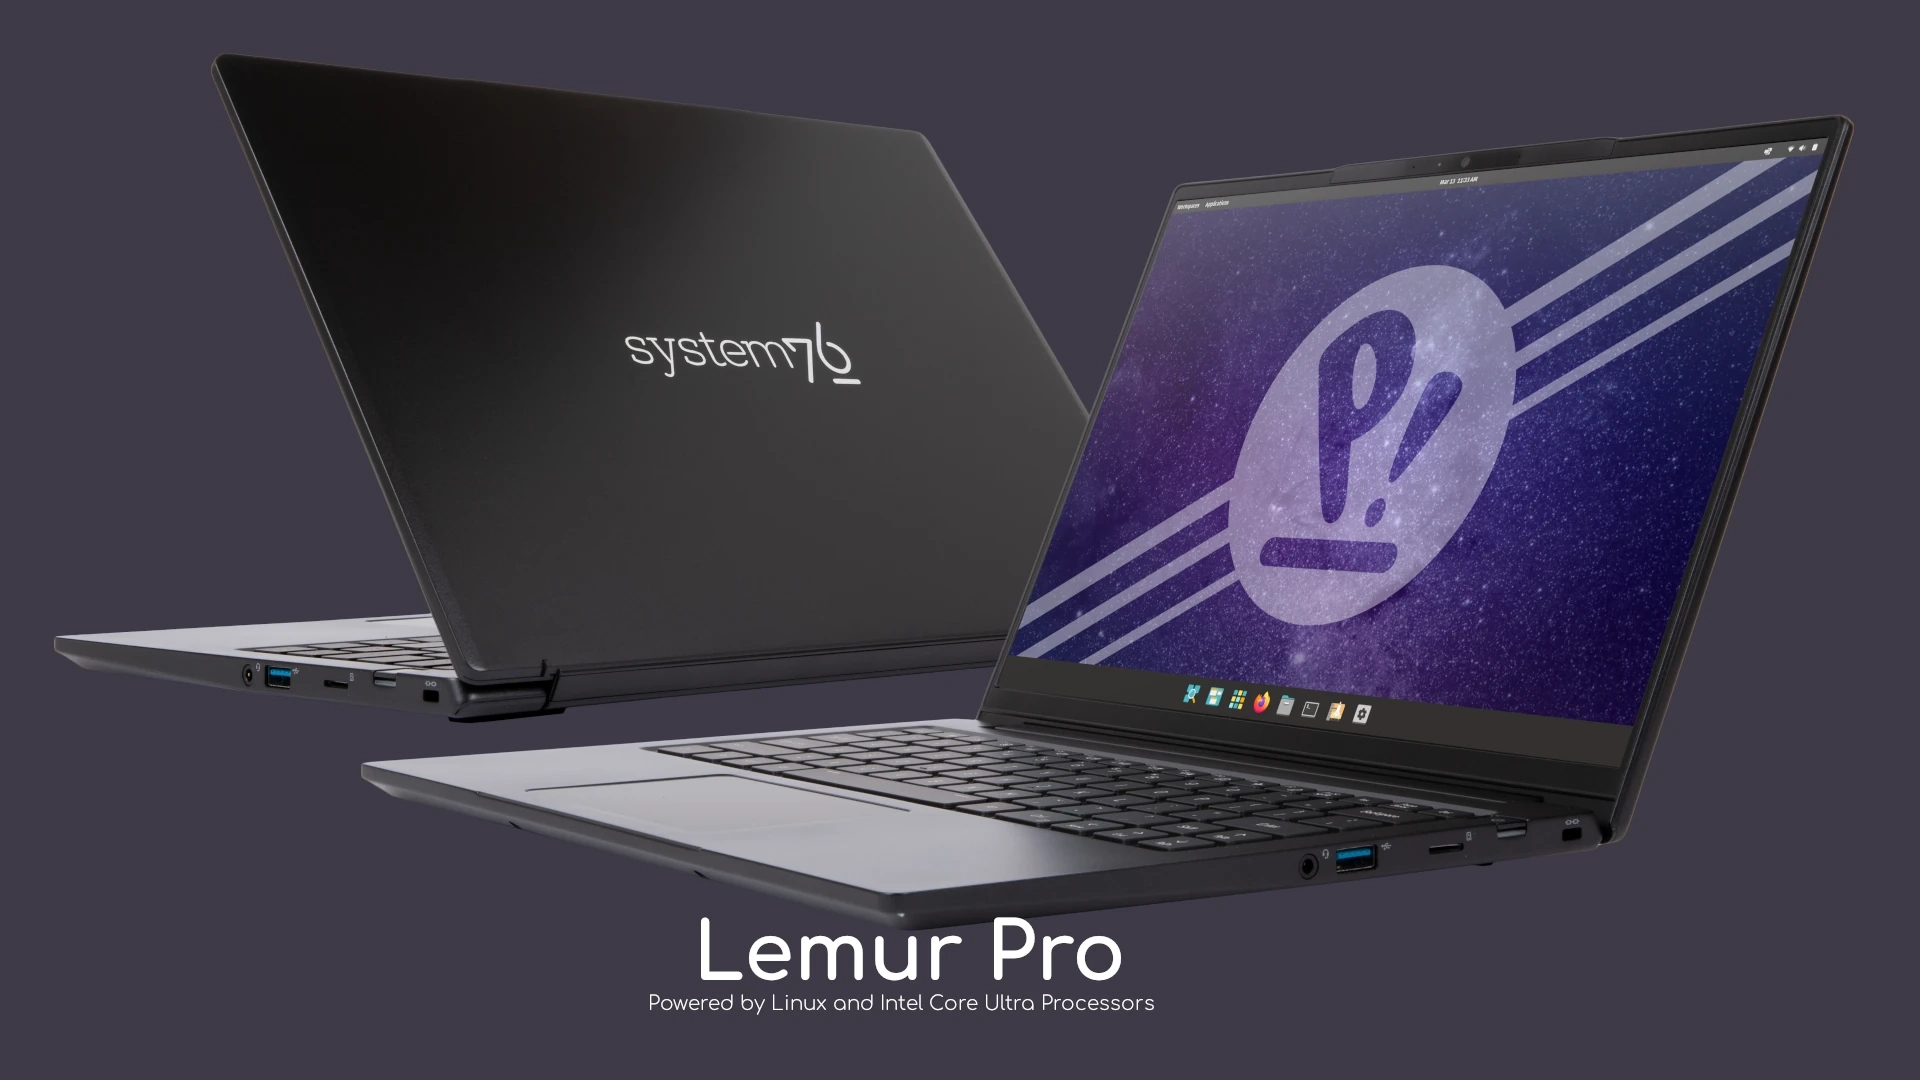 Introducing System76’s New Lemur Pro Linux Laptop with Advanced Intel Core Ultra Processors